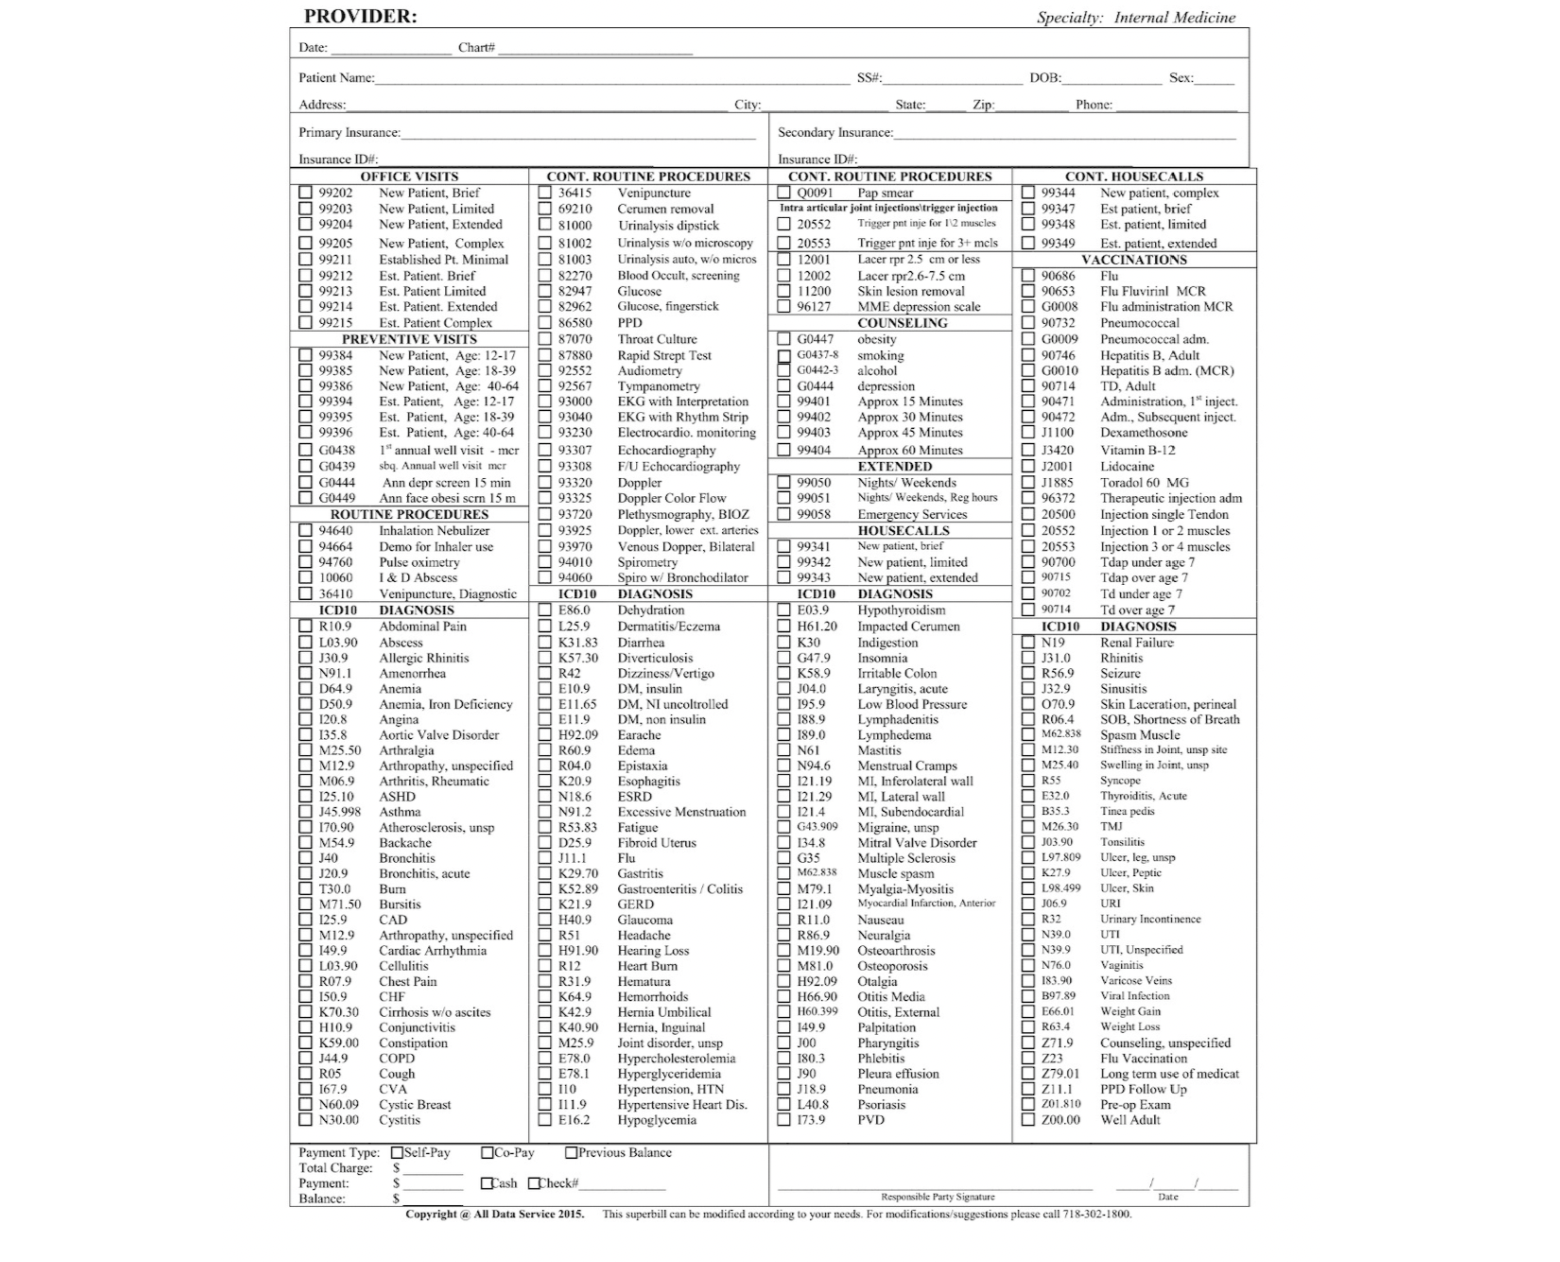 The paper version of a superbill. The top of the form contains fields for patient information, including name, address, date of birth, and insurance information. Below it are four columns of information that include many categories: office visits, preventive visits, routine procedures, diagnosis, counseling, extended, housecalls, and vaccinations. Under each category is a list of items, each with a code, and checkbox next to it. There are about 200 items on the page.